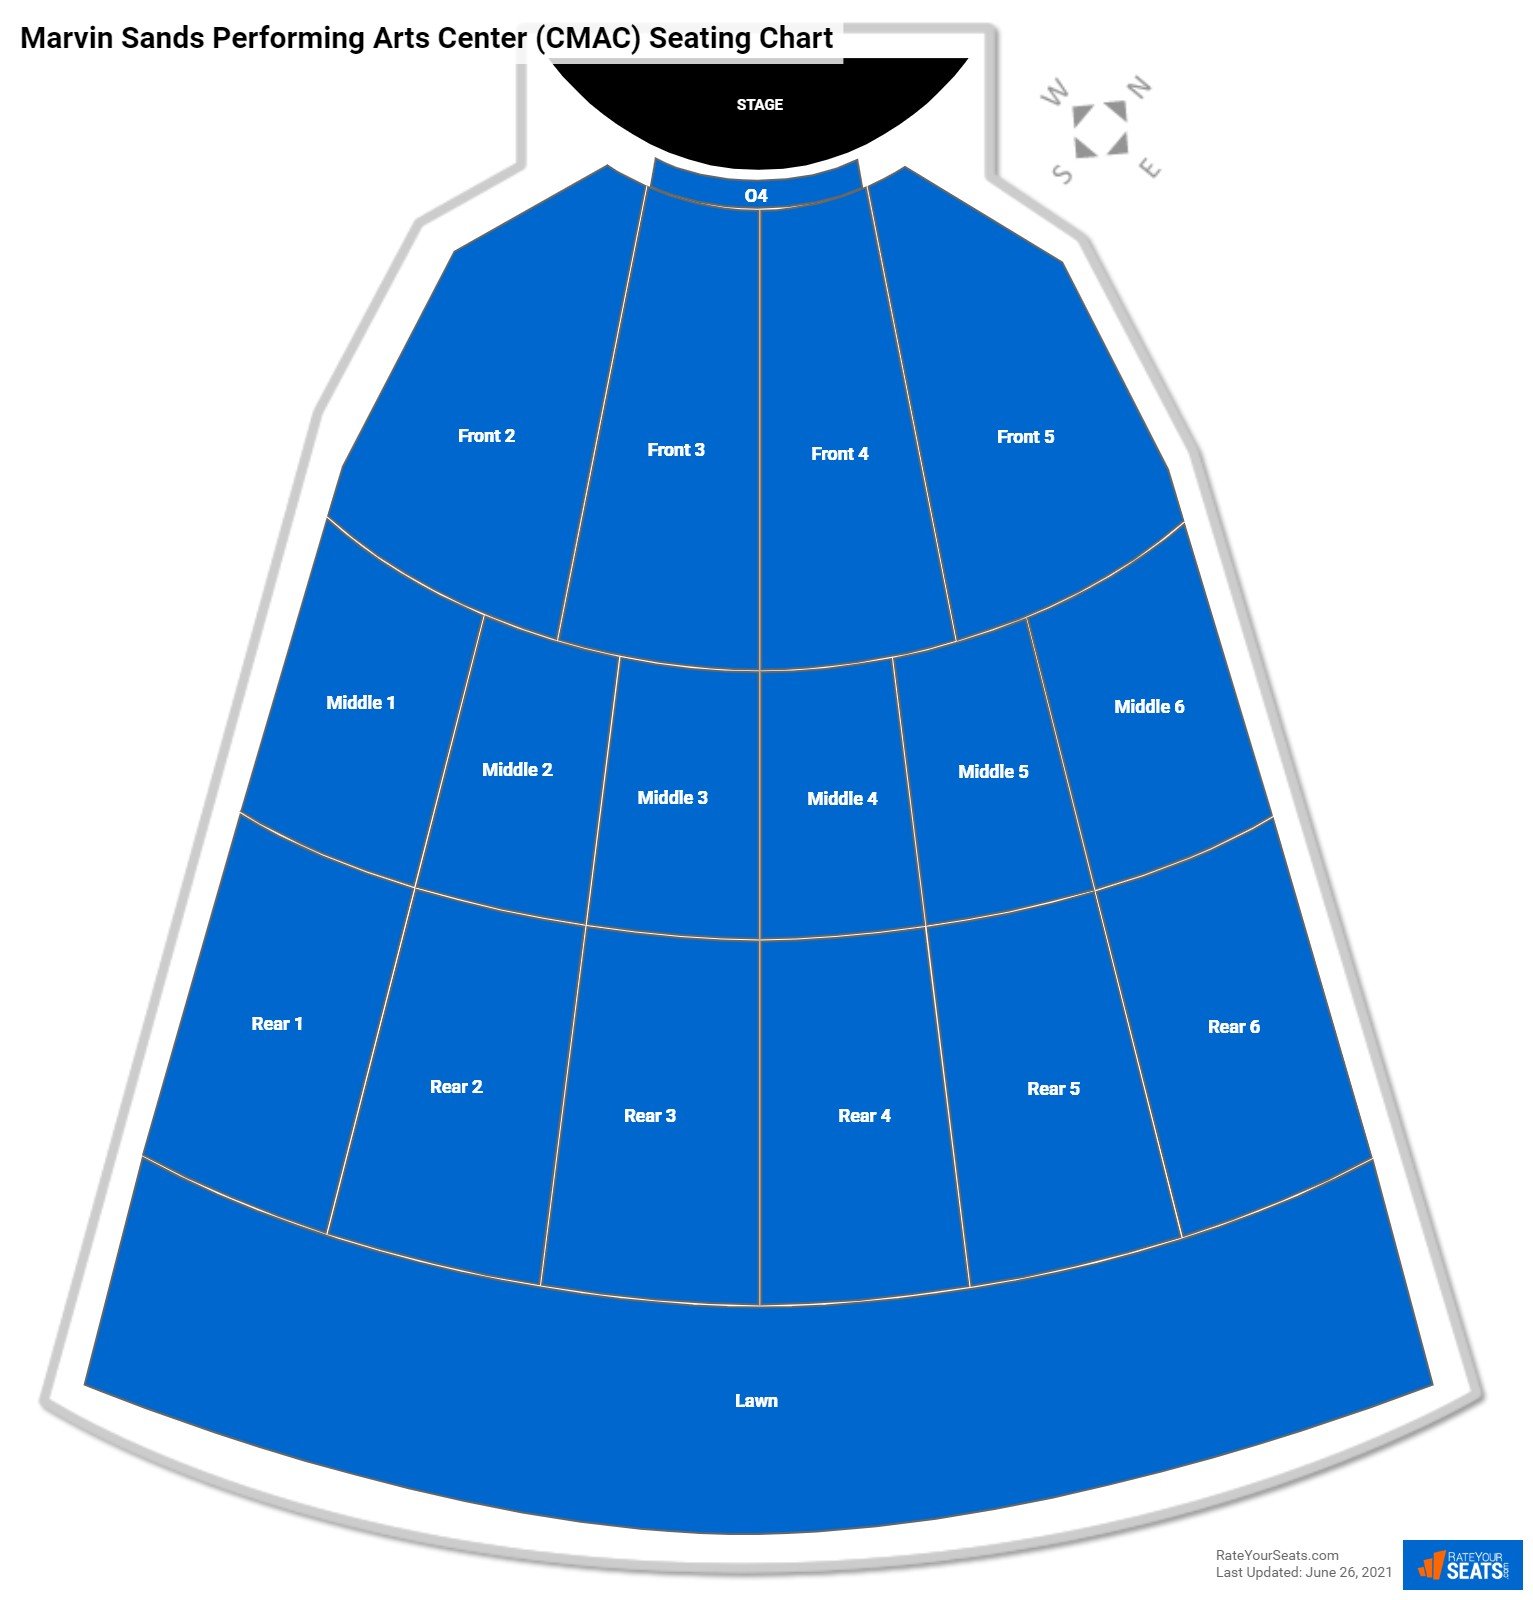 CMAC (Marvin Sands Performing Arts Center) Concert Seating Chart